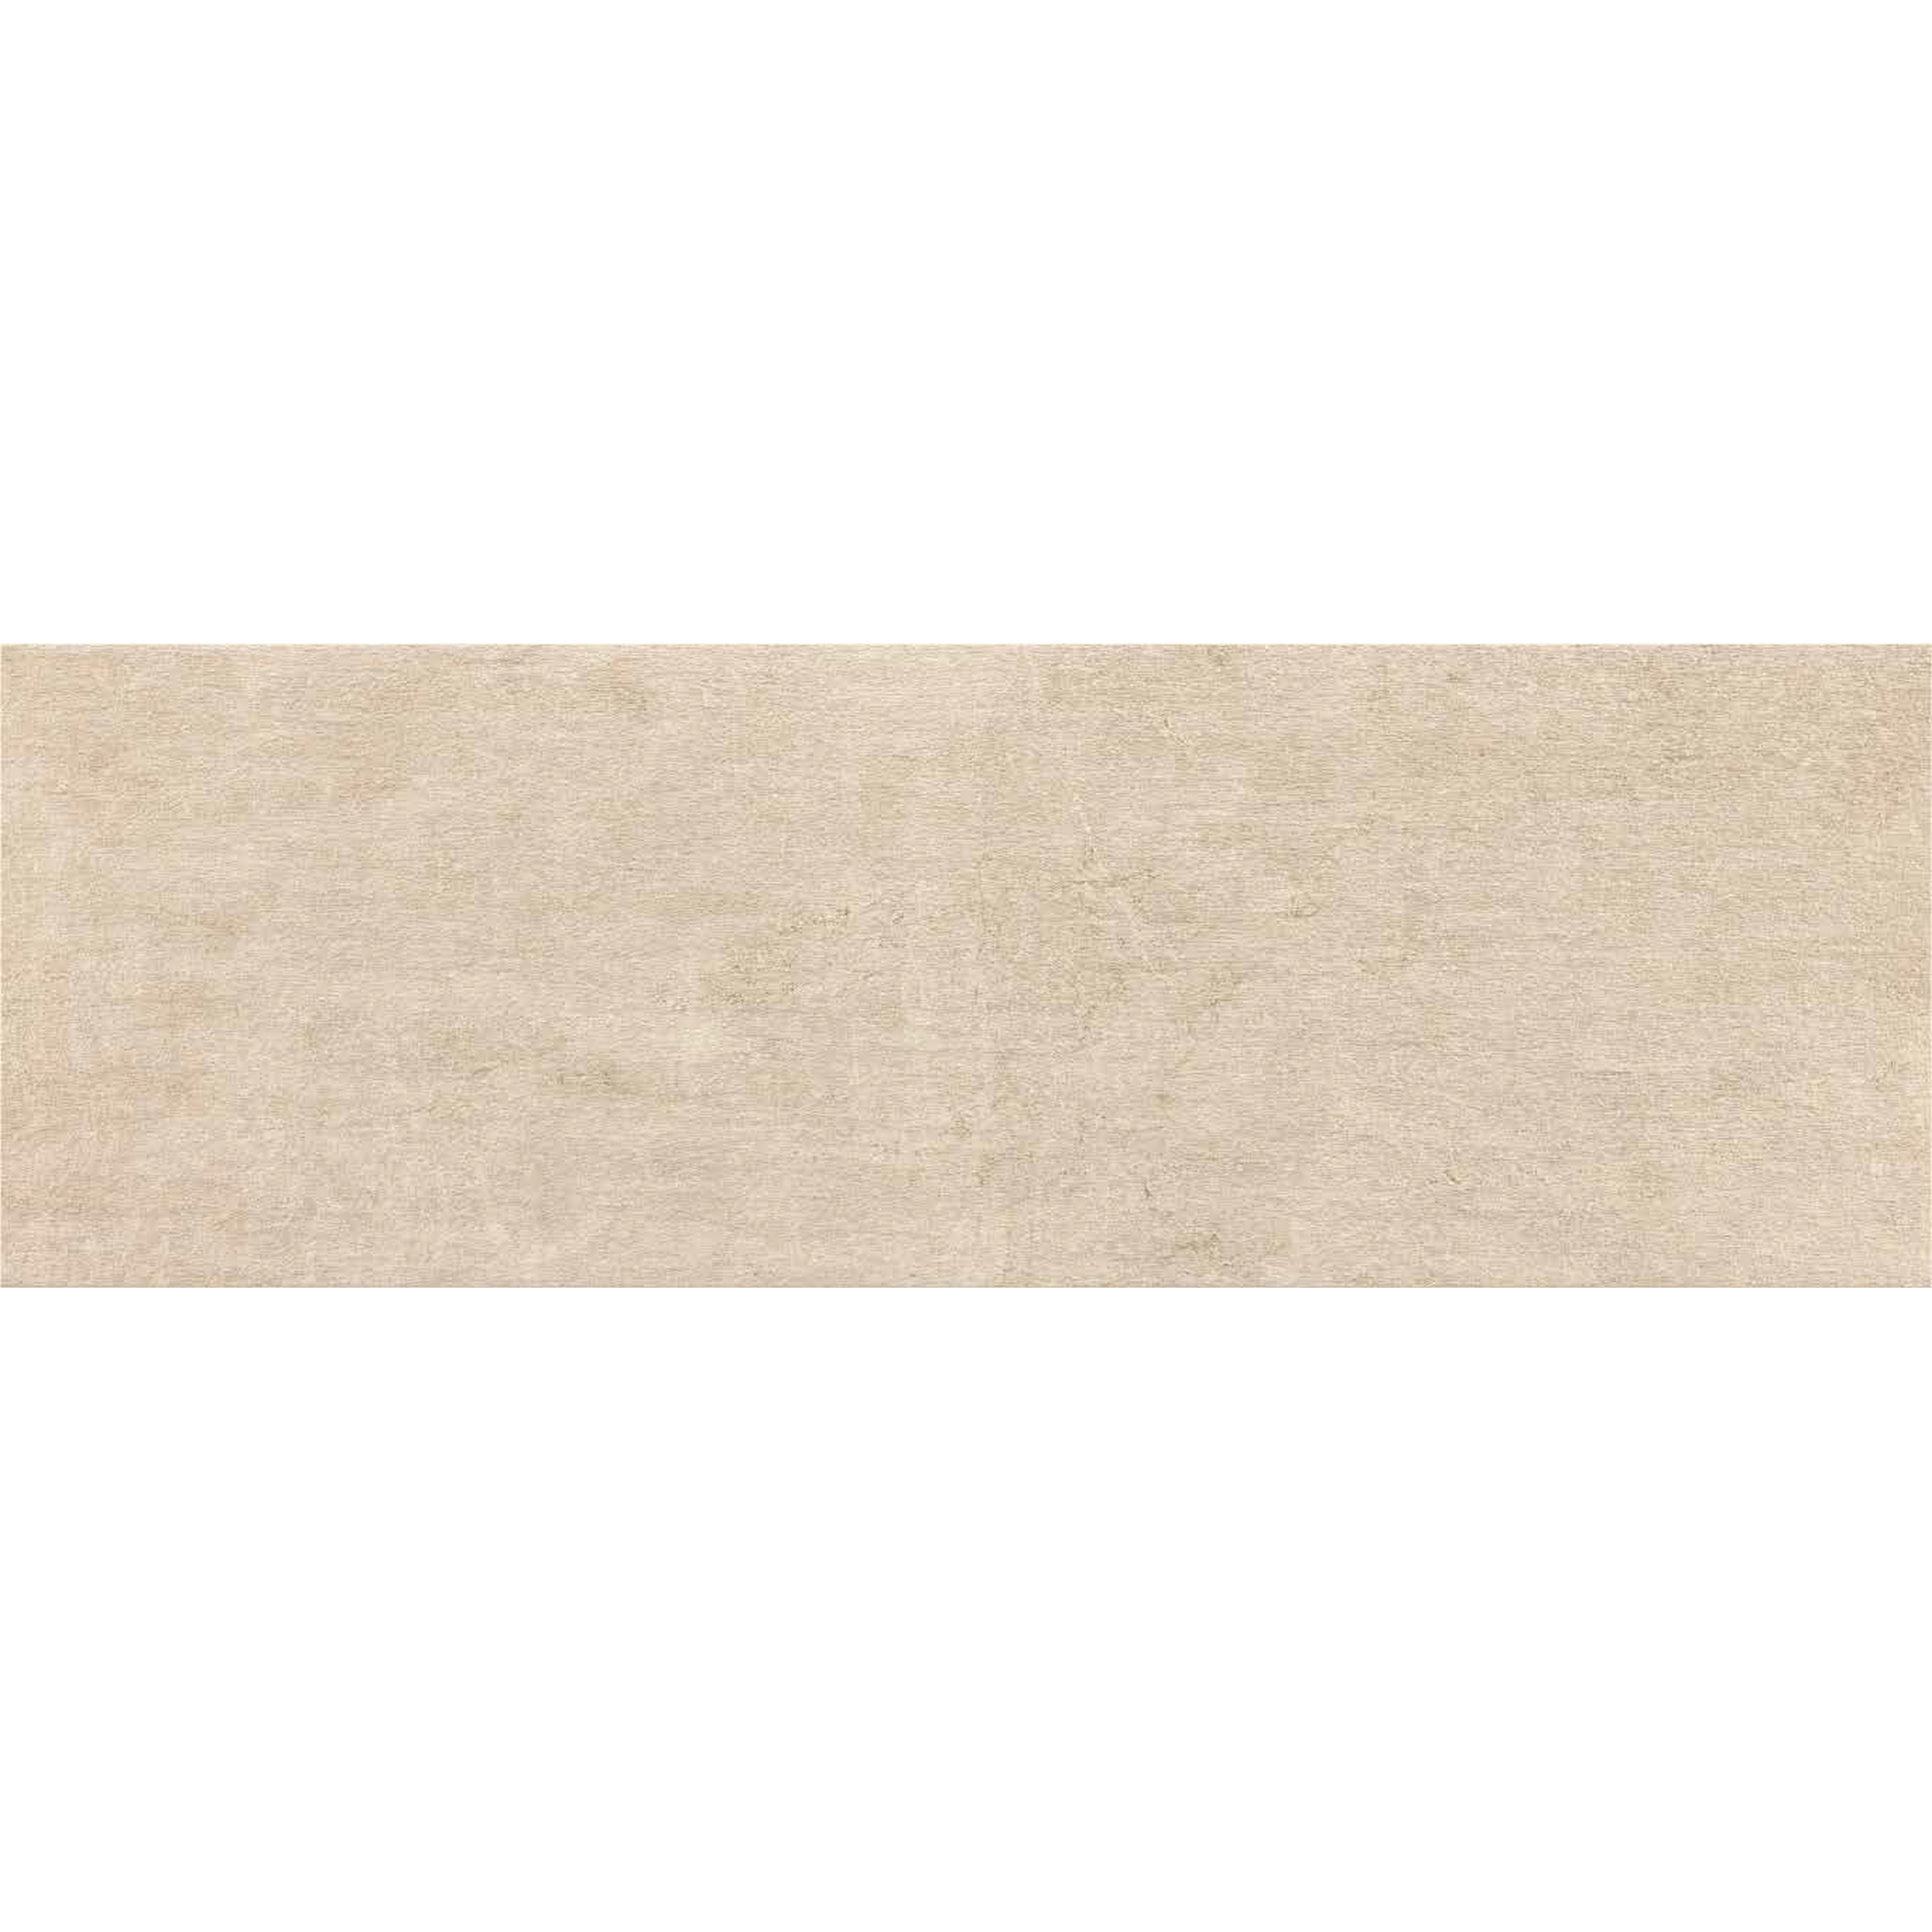 Wandfliese 'Leeds' Steingut taupe 30 x 90 cm + product picture